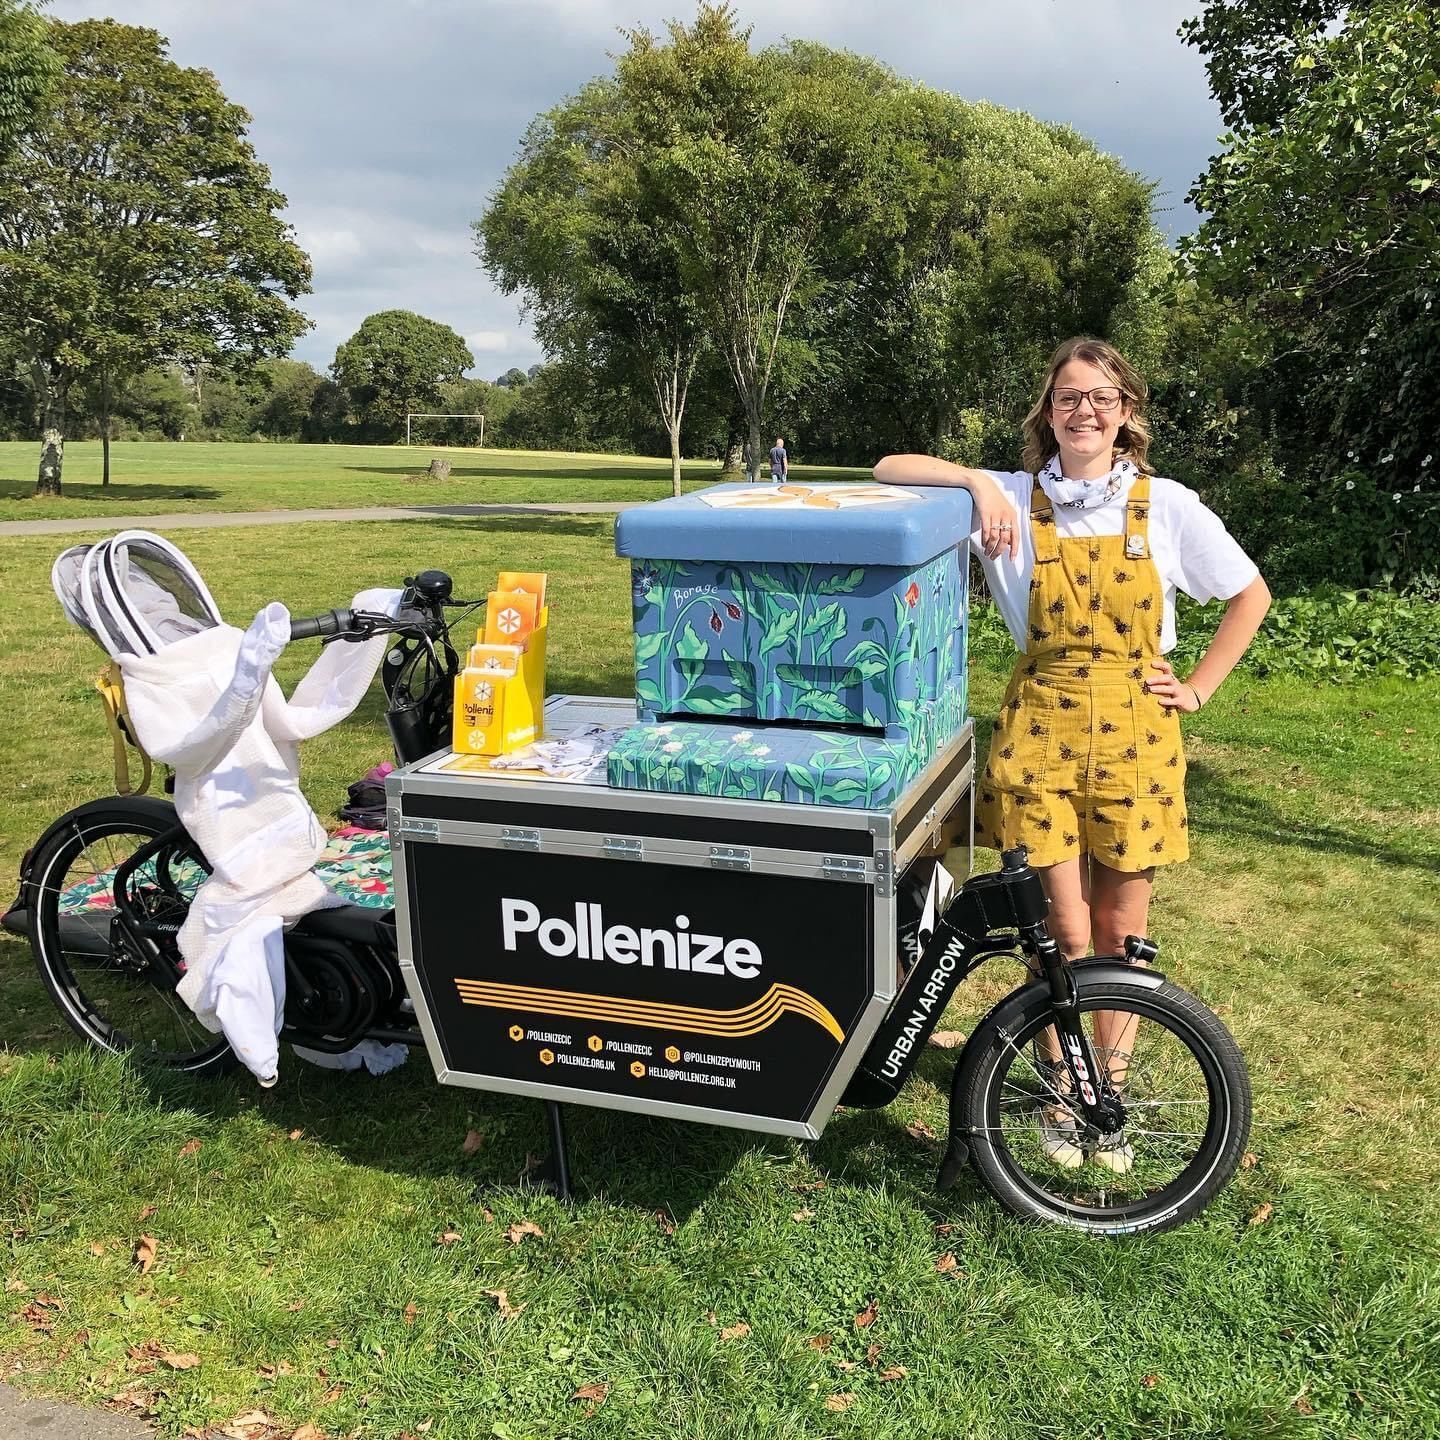 Brittany Clarke Marketing and Communications Assistant at Pollenize with their E cargo bike and decorated beehive in Central park Credit University of Plymouth